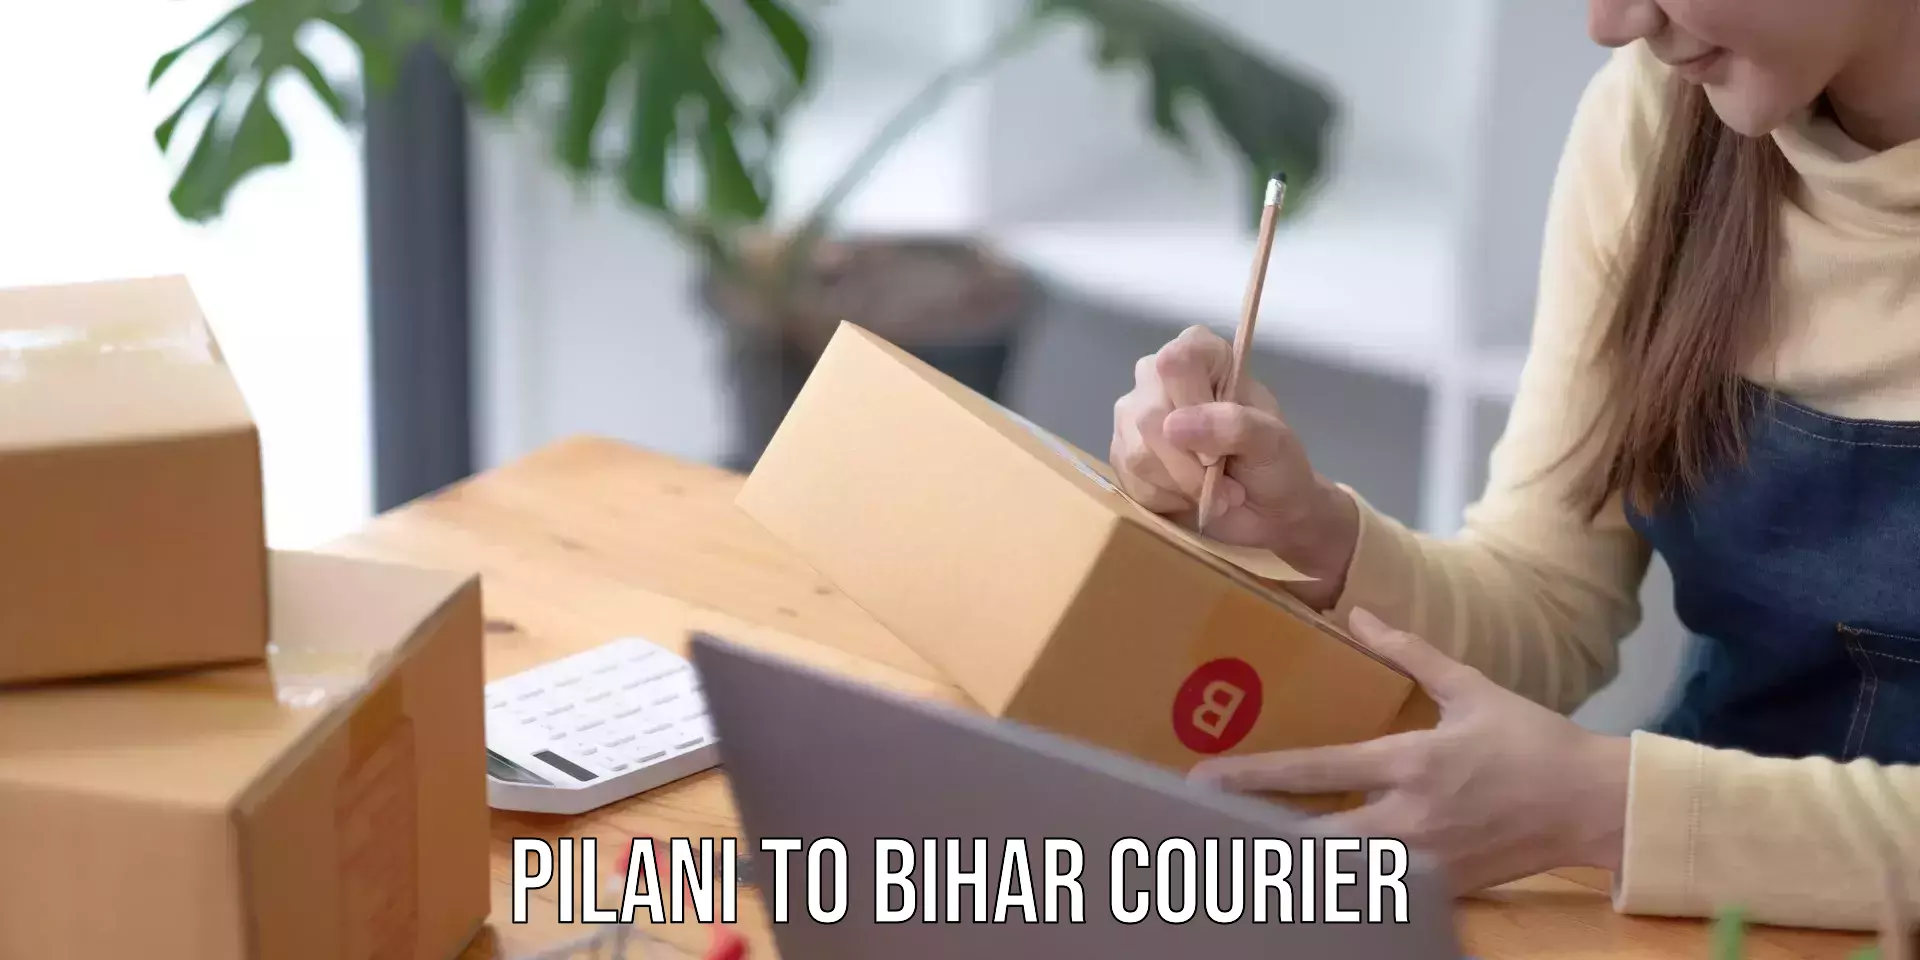 Courier service innovation Pilani to Rohtas